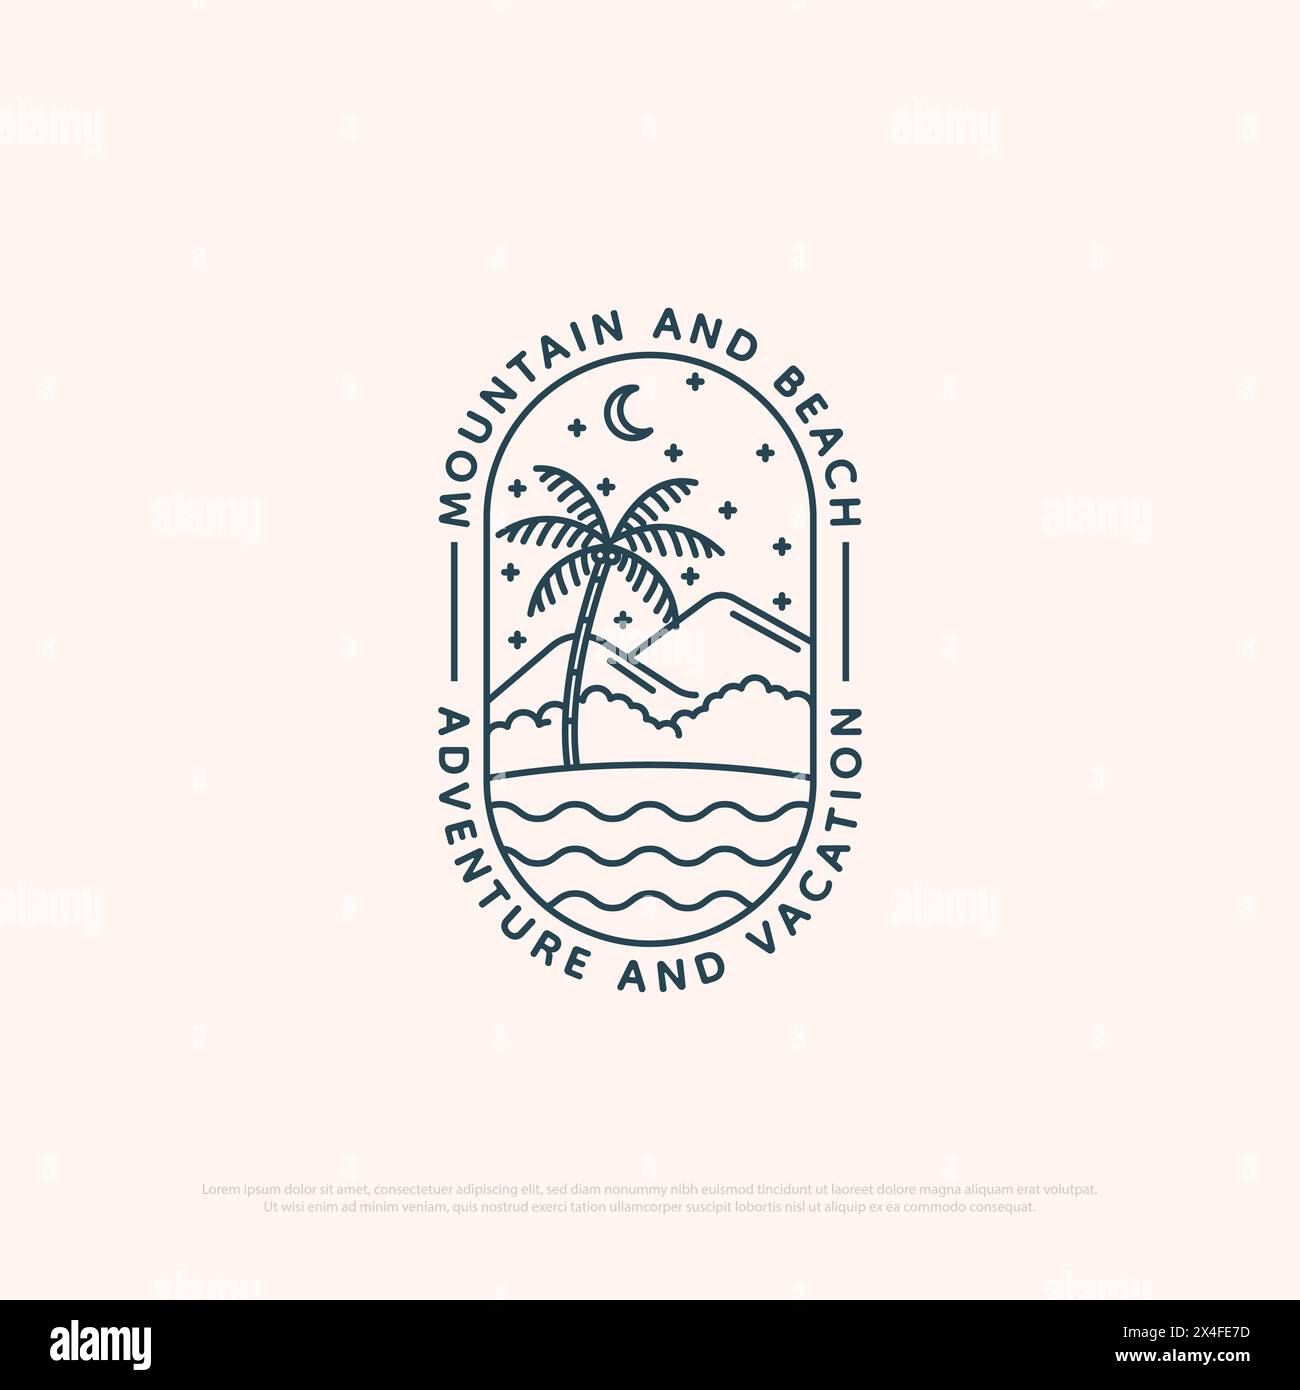 Mountain and beach vacation logo design with line art simple vector minimalist illustration template, travel agency logo designs Stock Vector